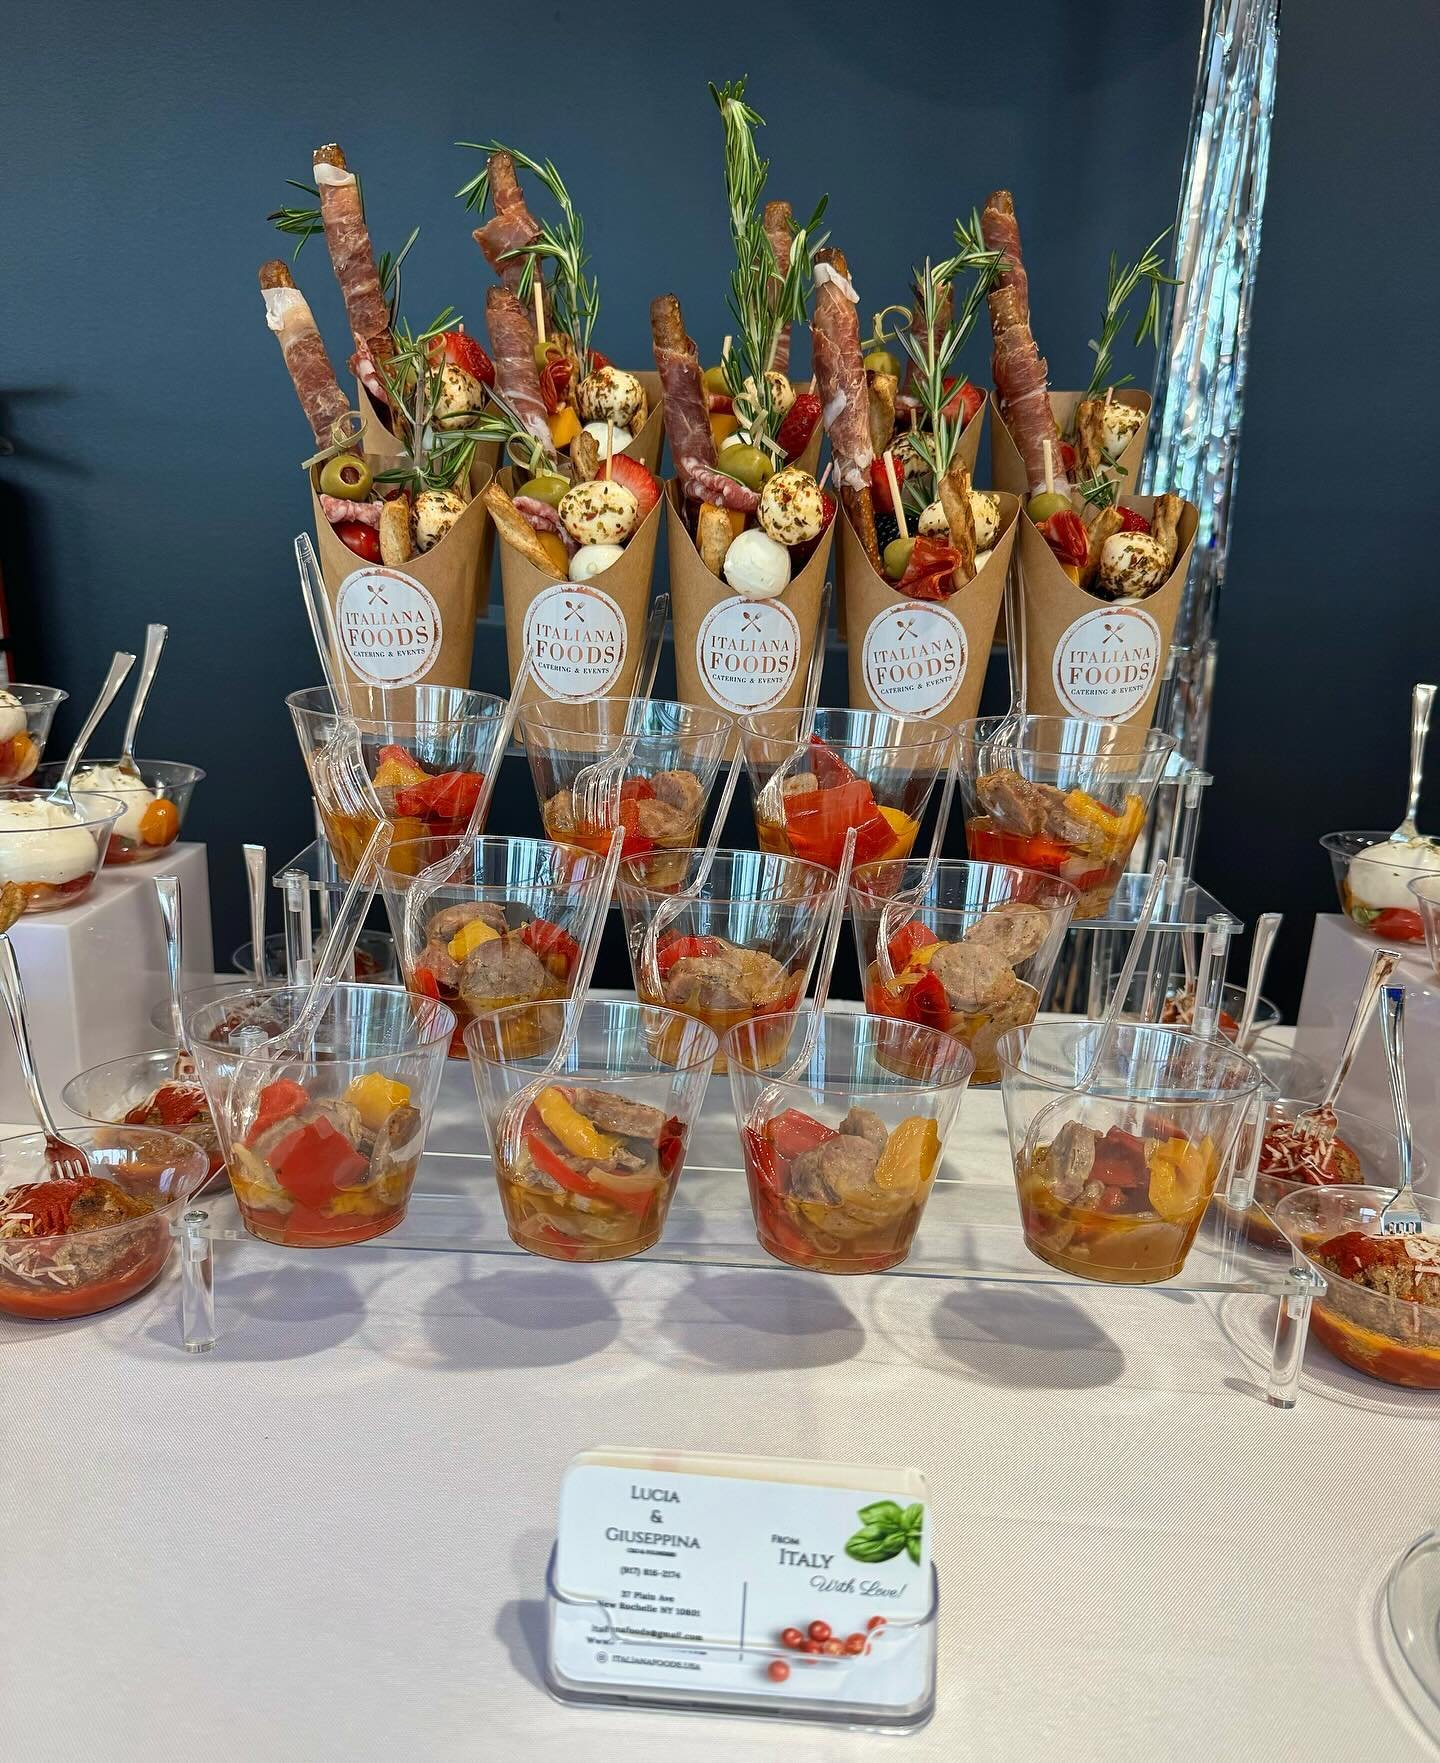 Thank you @mazdanewroc for choosing us to cater your grand opening! #italianafoods #cateringservice #privateevents #newrochelle